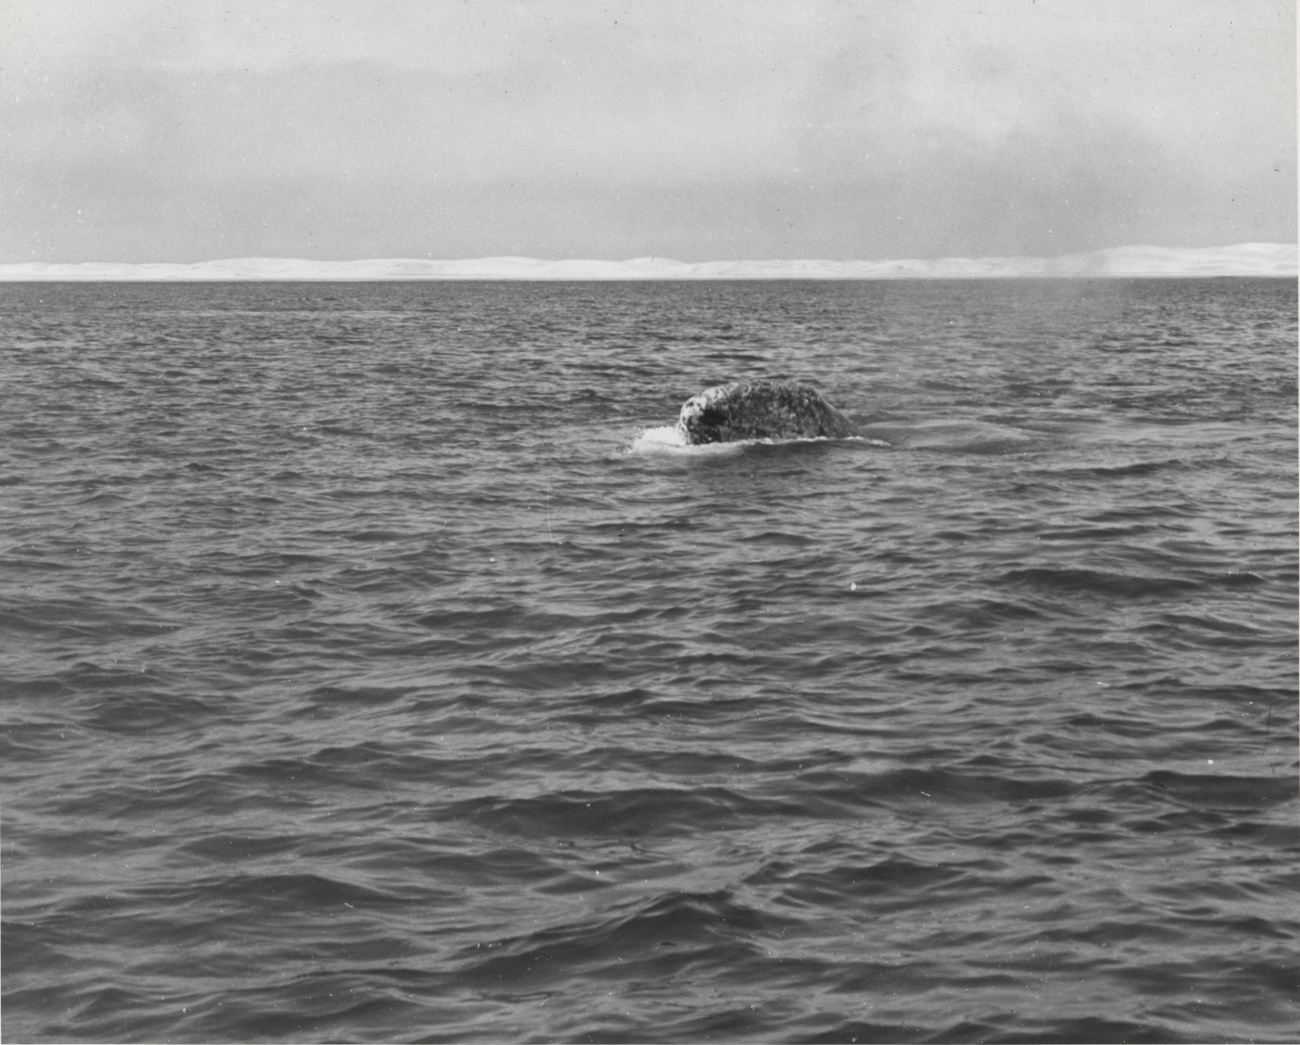 Gray whale rising low out of water to look-see